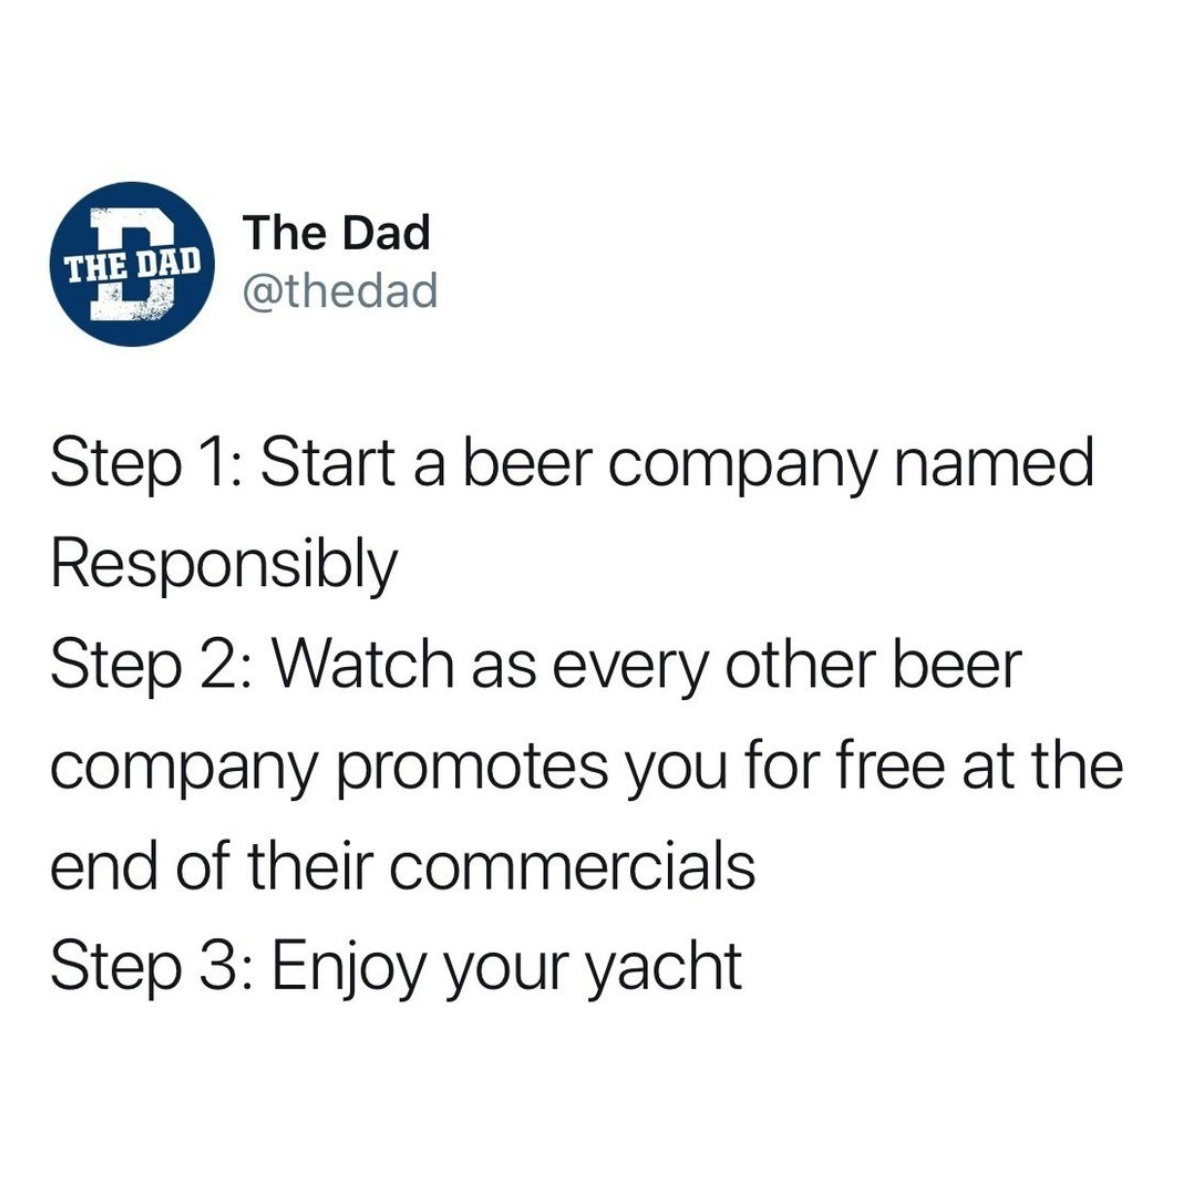 angle - The Dad The Dad Step 1 Start a beer company named Responsibly Step 2 Watch as every other beer company promotes you for free at the end of their commercials Step 3 Enjoy your yacht